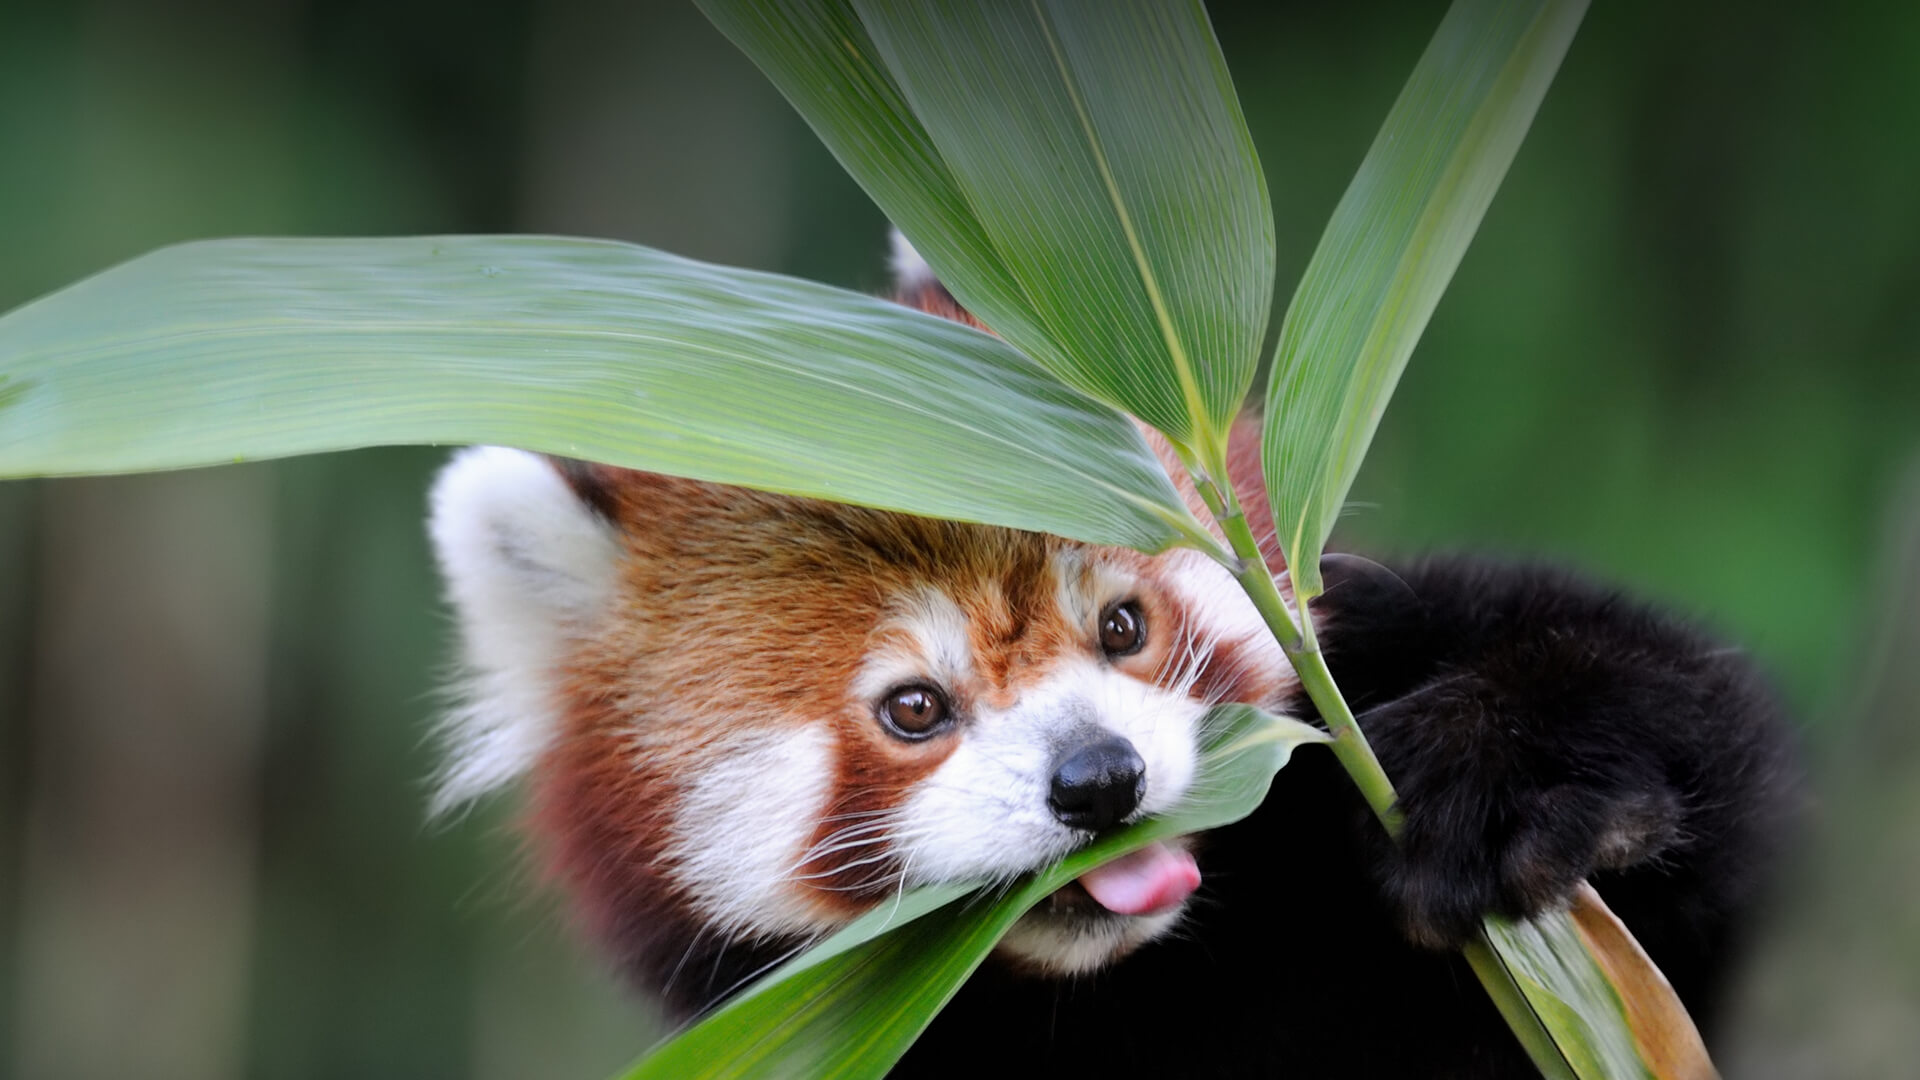 A red panda chewing on bamboo leaves.